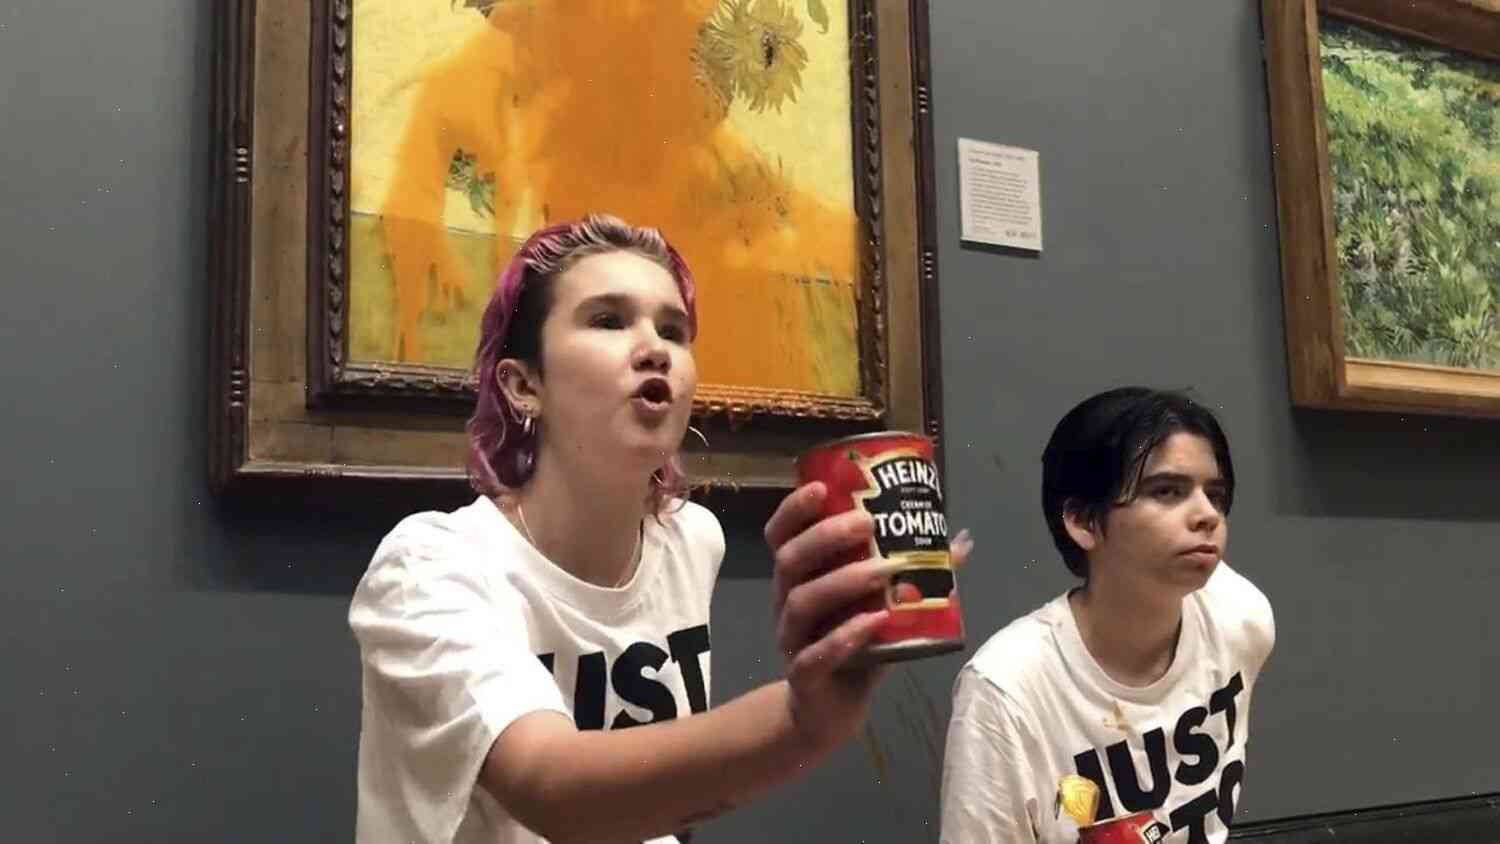 Smearing Smelted Food on the "Mona Lisa" is a very symbolic way to end the climate crisis